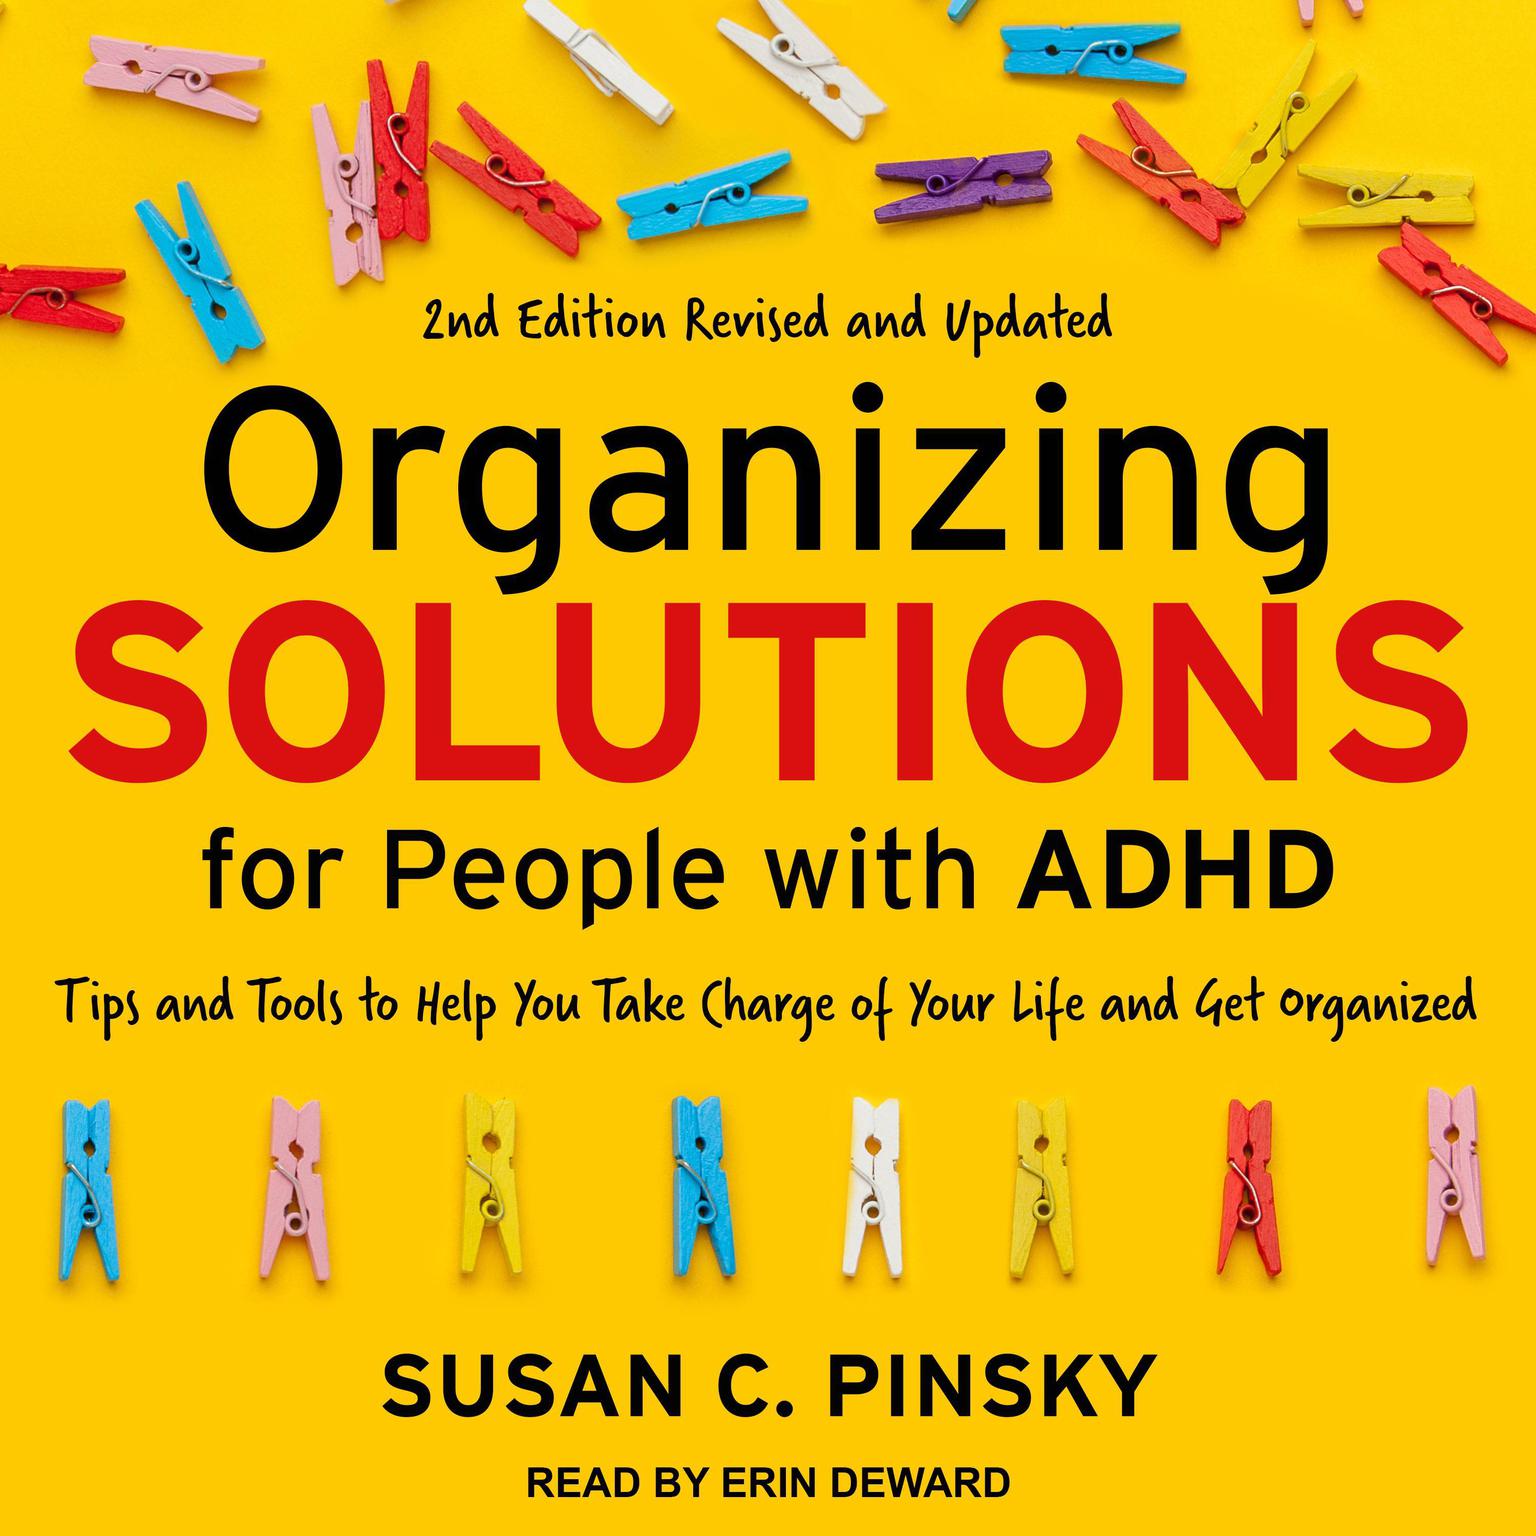 Organizing Solutions for People with ADHD, 2nd Edition-Revised and Updated: Tips and Tools to Help You Take Charge of Your Life and Get Organized Audiobook, by Susan C. Pinsky